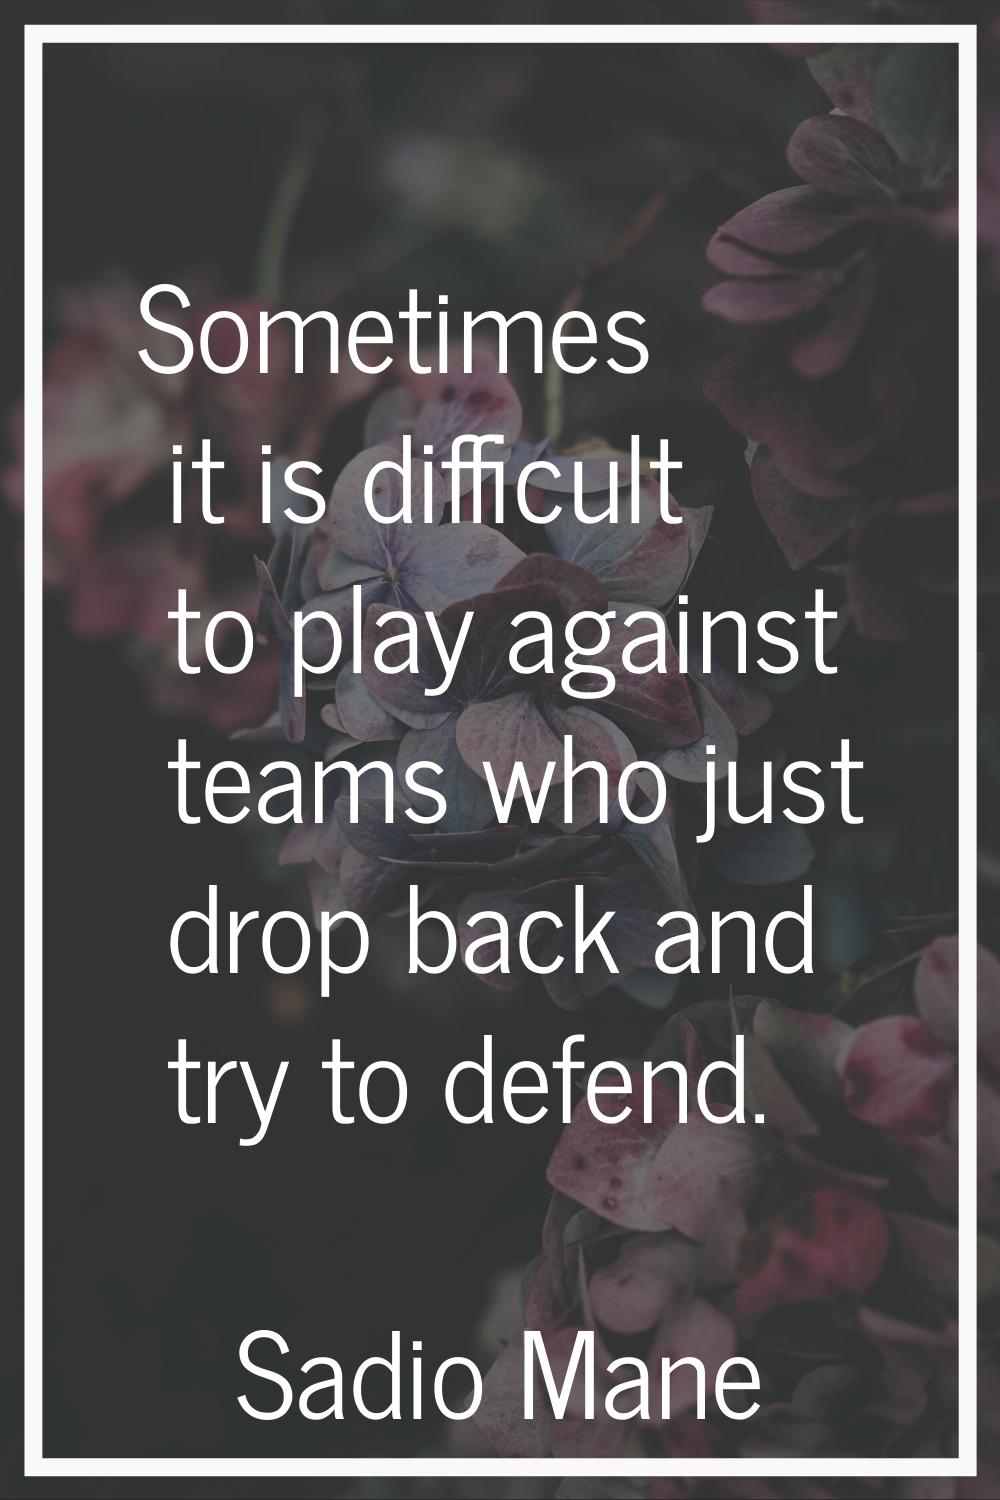 Sometimes it is difficult to play against teams who just drop back and try to defend.